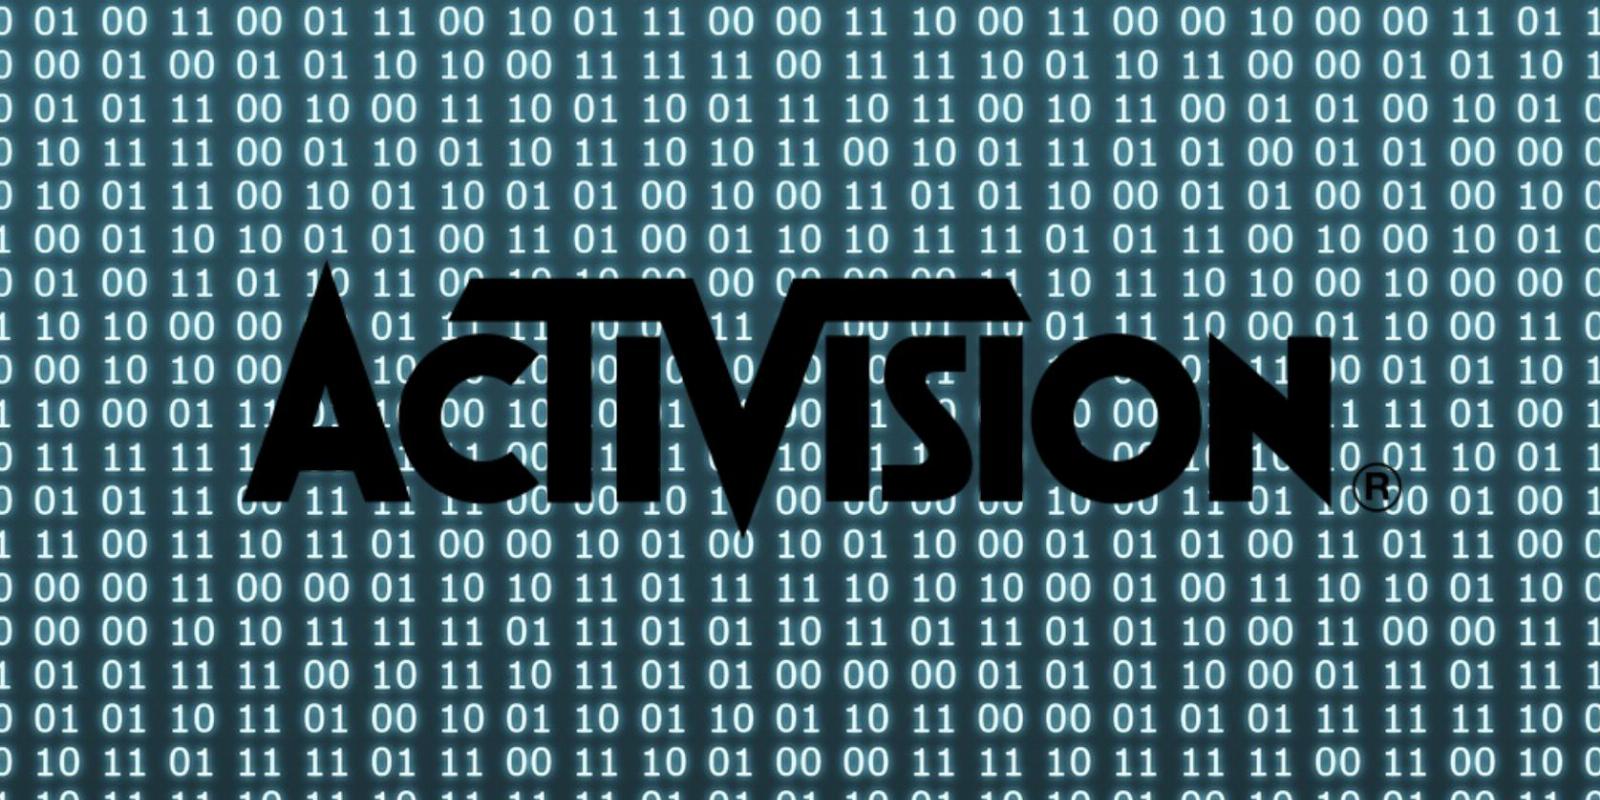 Activision Hack Exposes Employee and Game Data